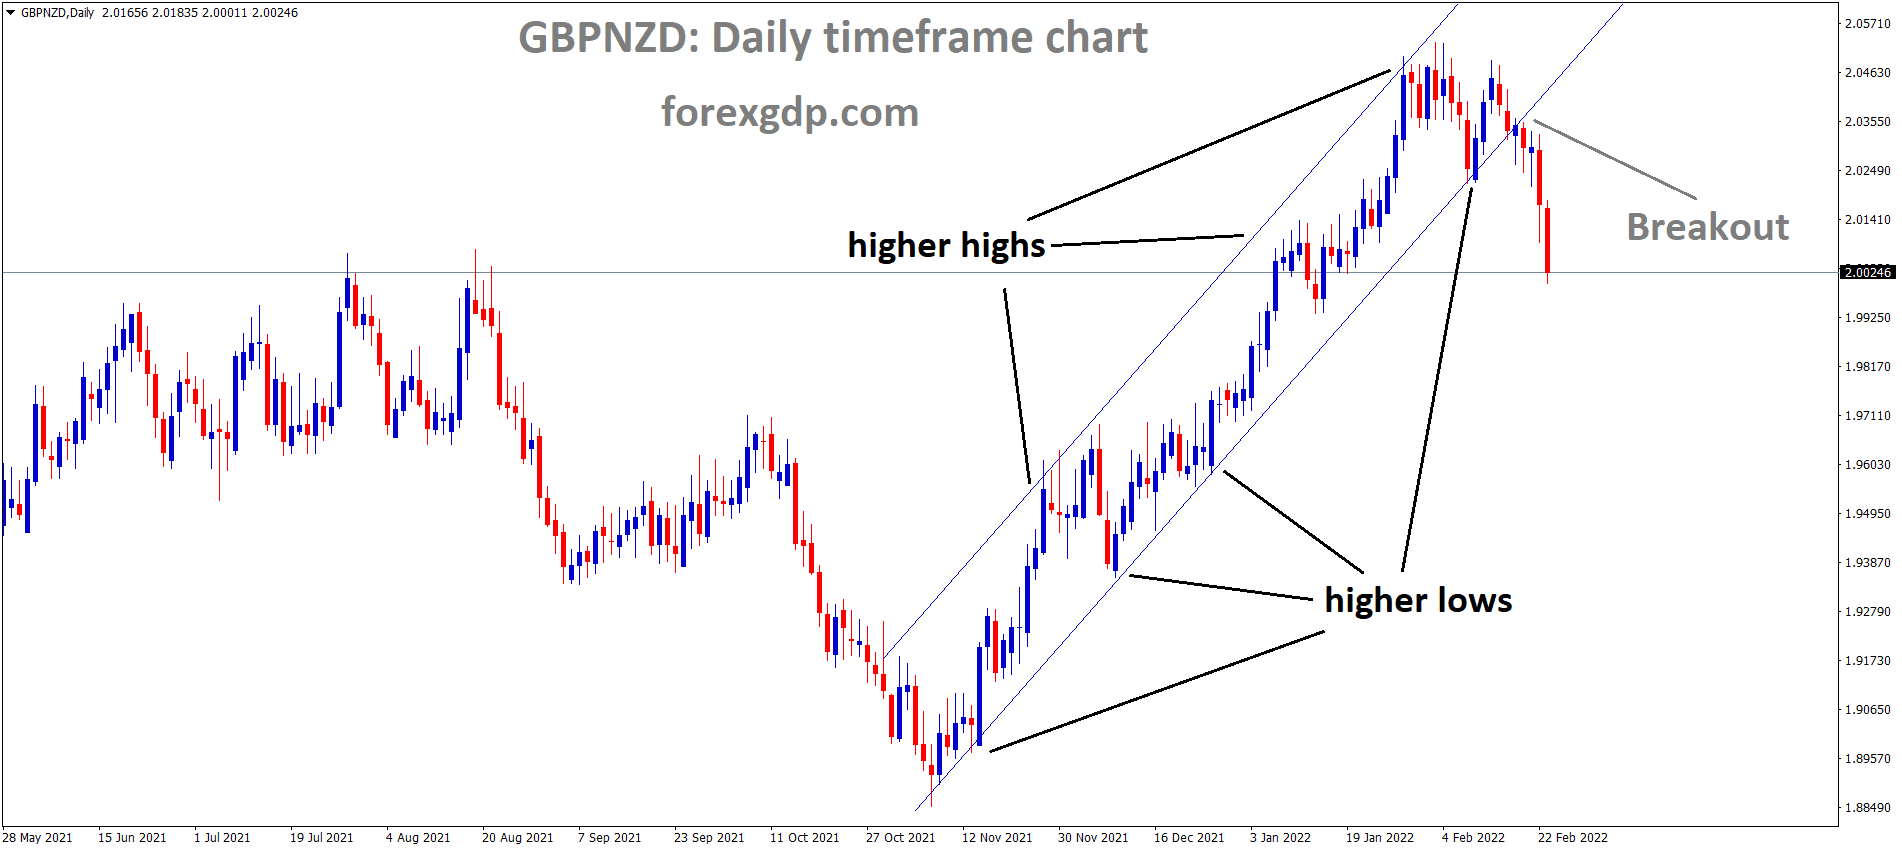 GBPNZD has broken the Ascending channel.